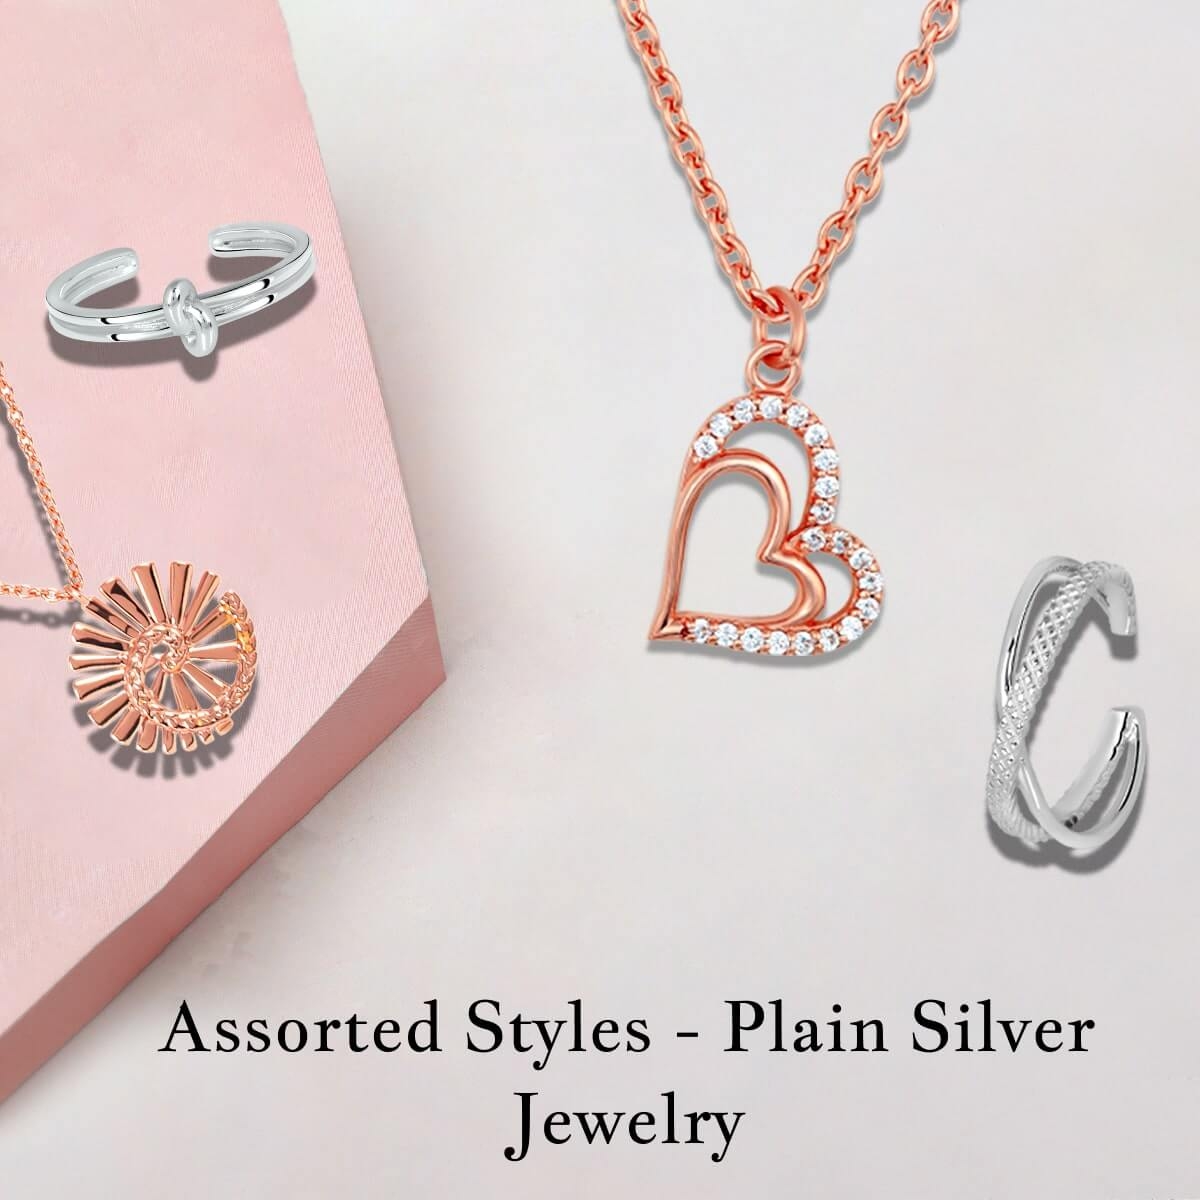 Types of Assortment of Plain Silver Jewelry